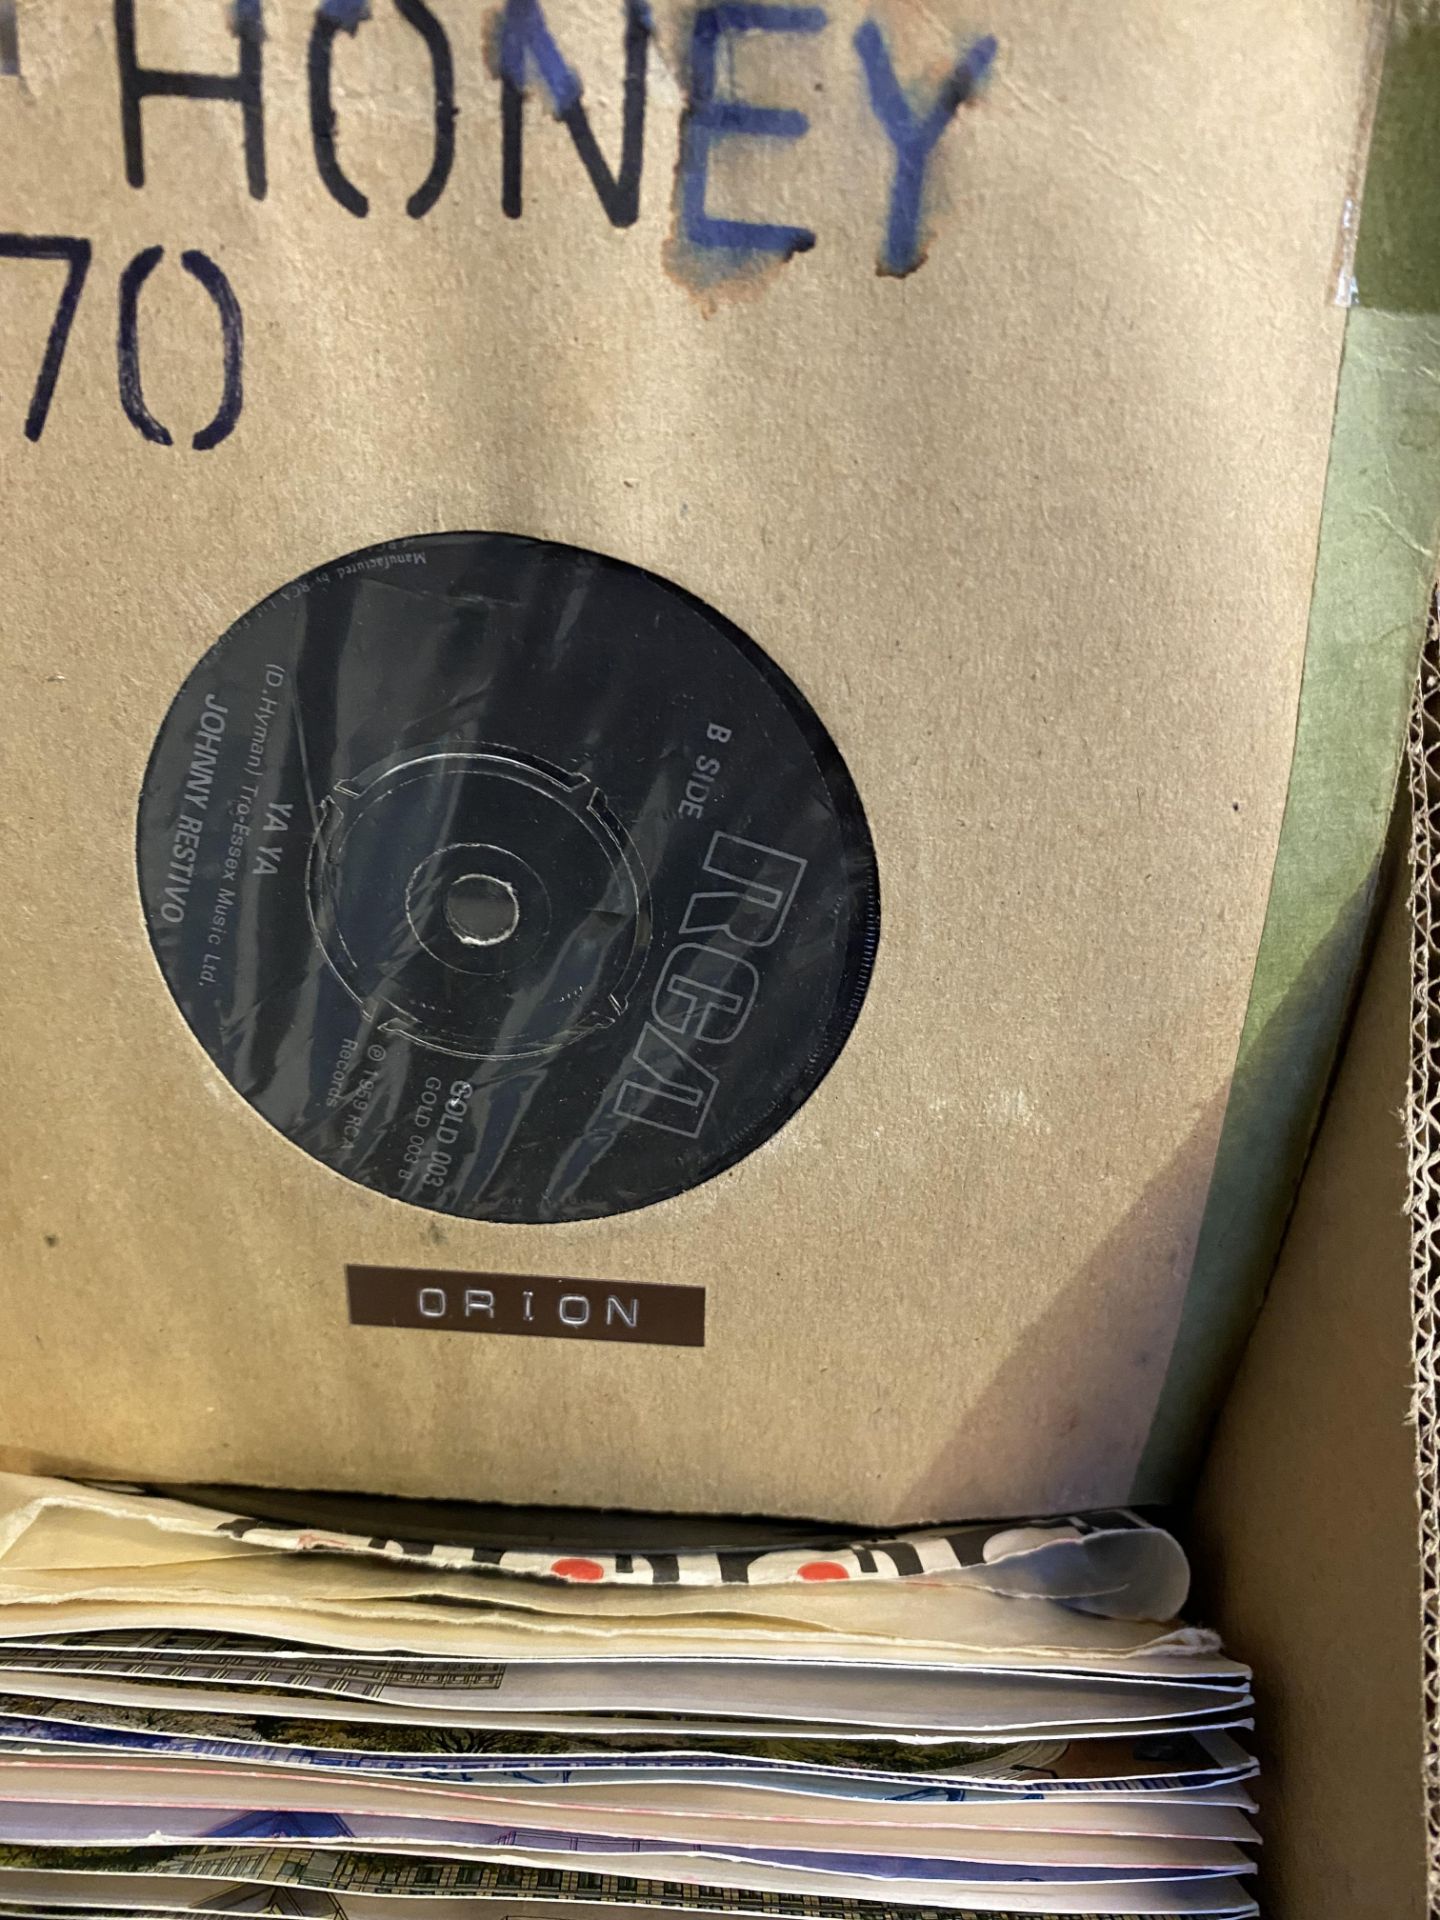 Quantity of vinyl singles without covers. - Image 9 of 9